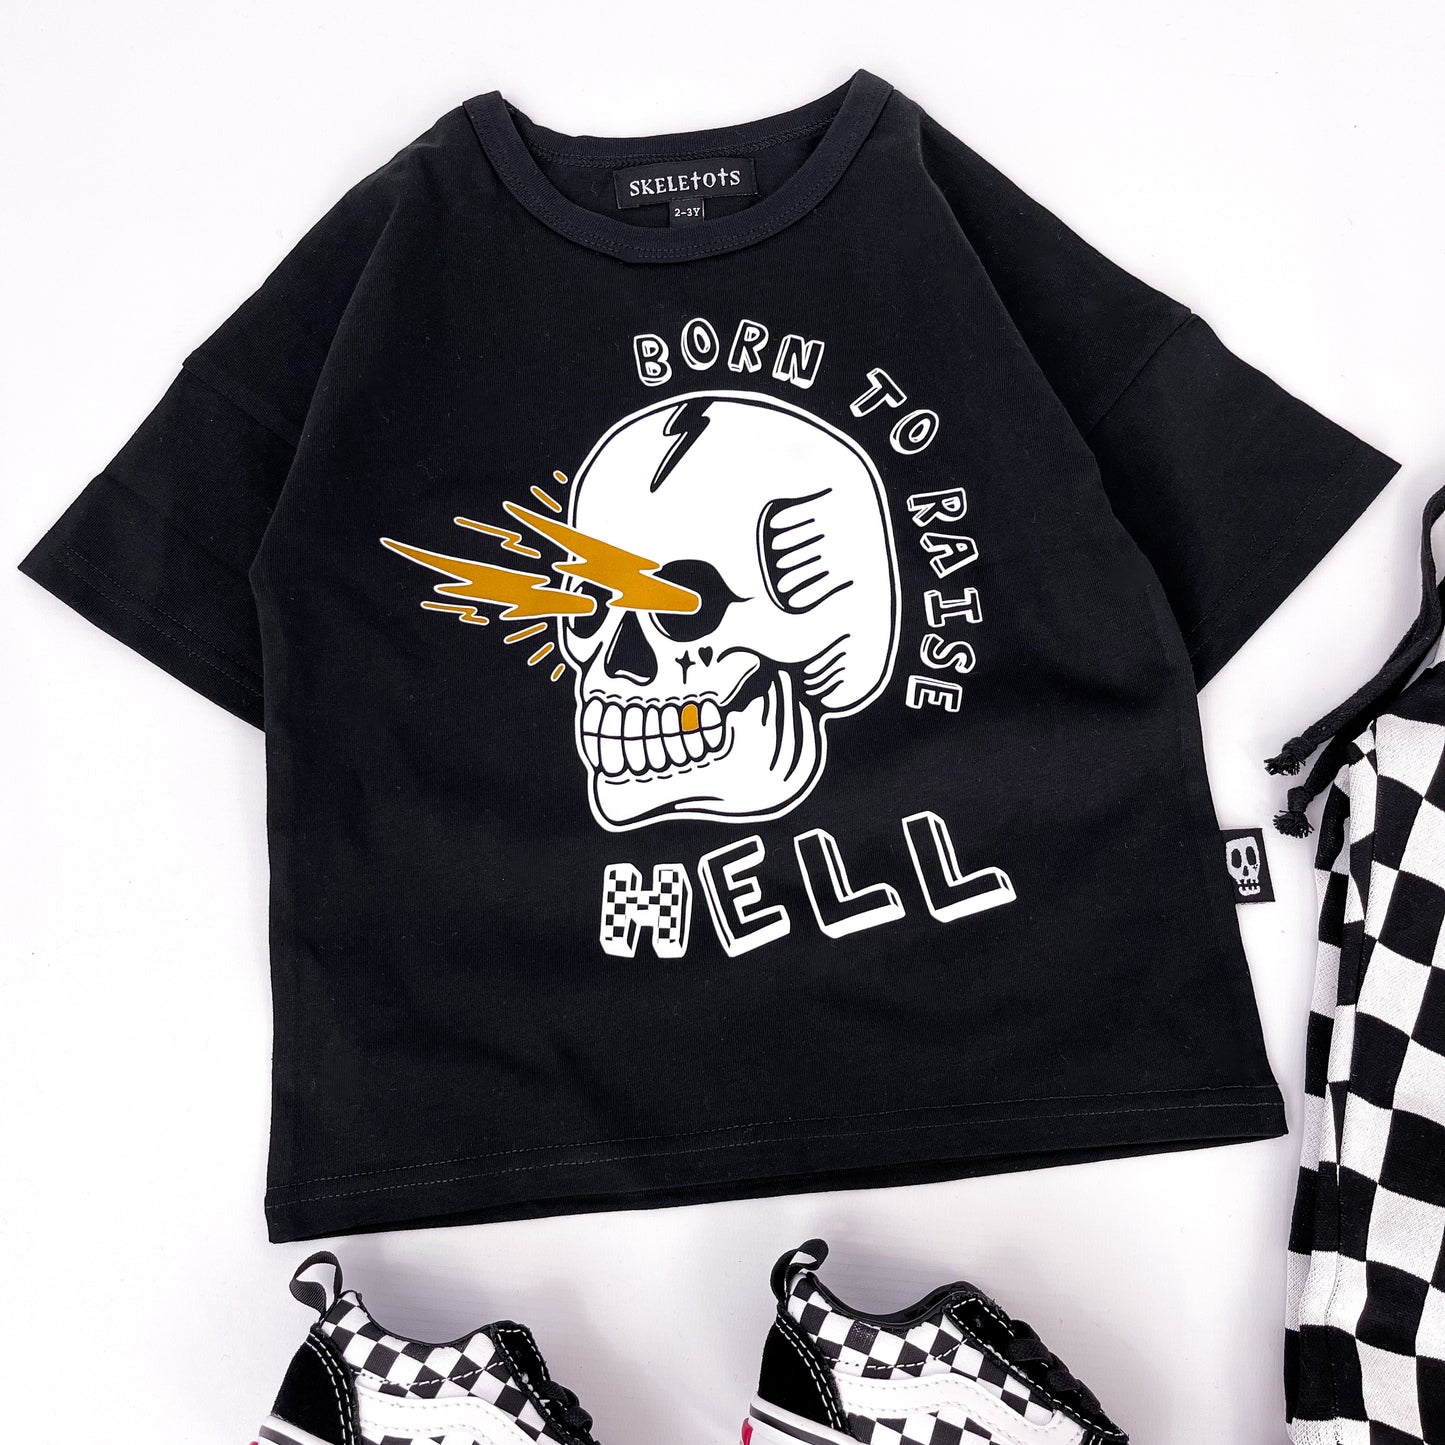 Kids black t shirt with "born to raise hell" printed on and a design of a skull shooting lightning bolts from its eye sockets